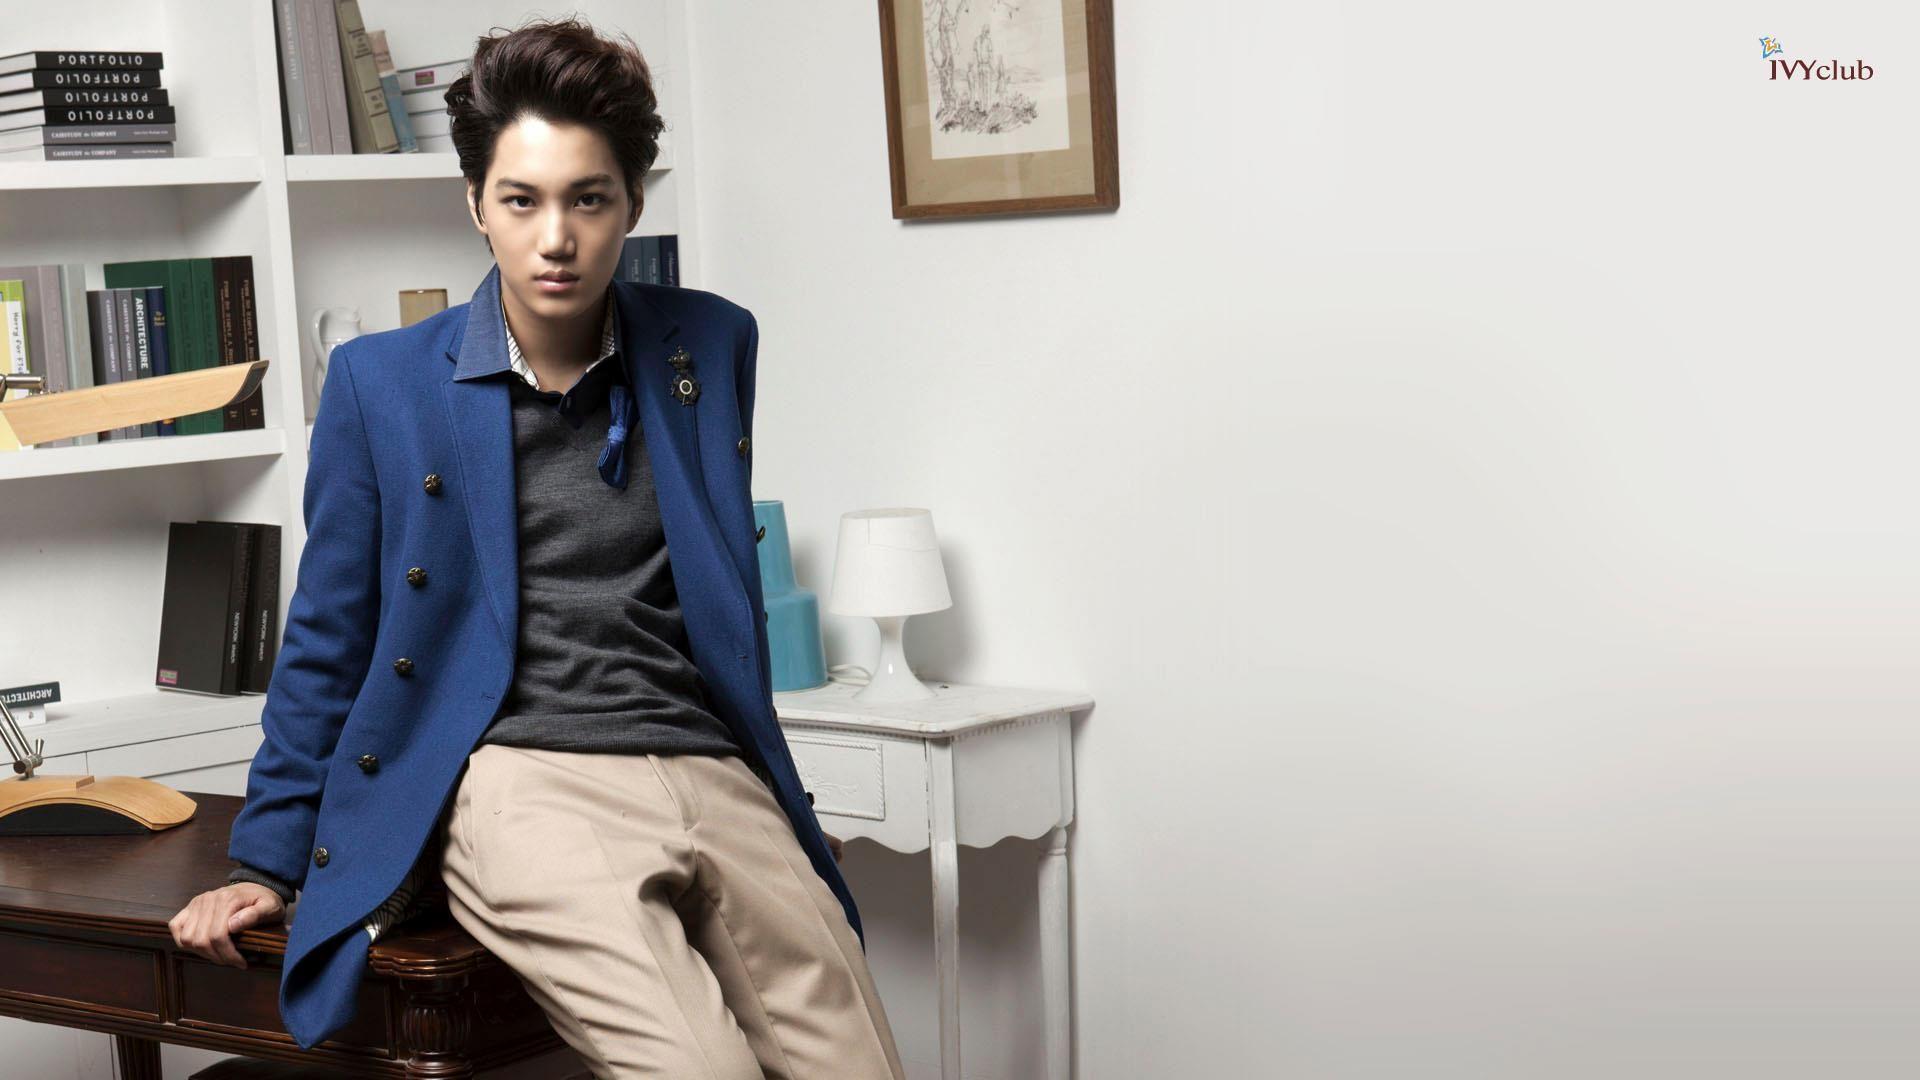 EXO TOWN: EXO K Ivy Club Official Site Update: Kai. EXO Planet